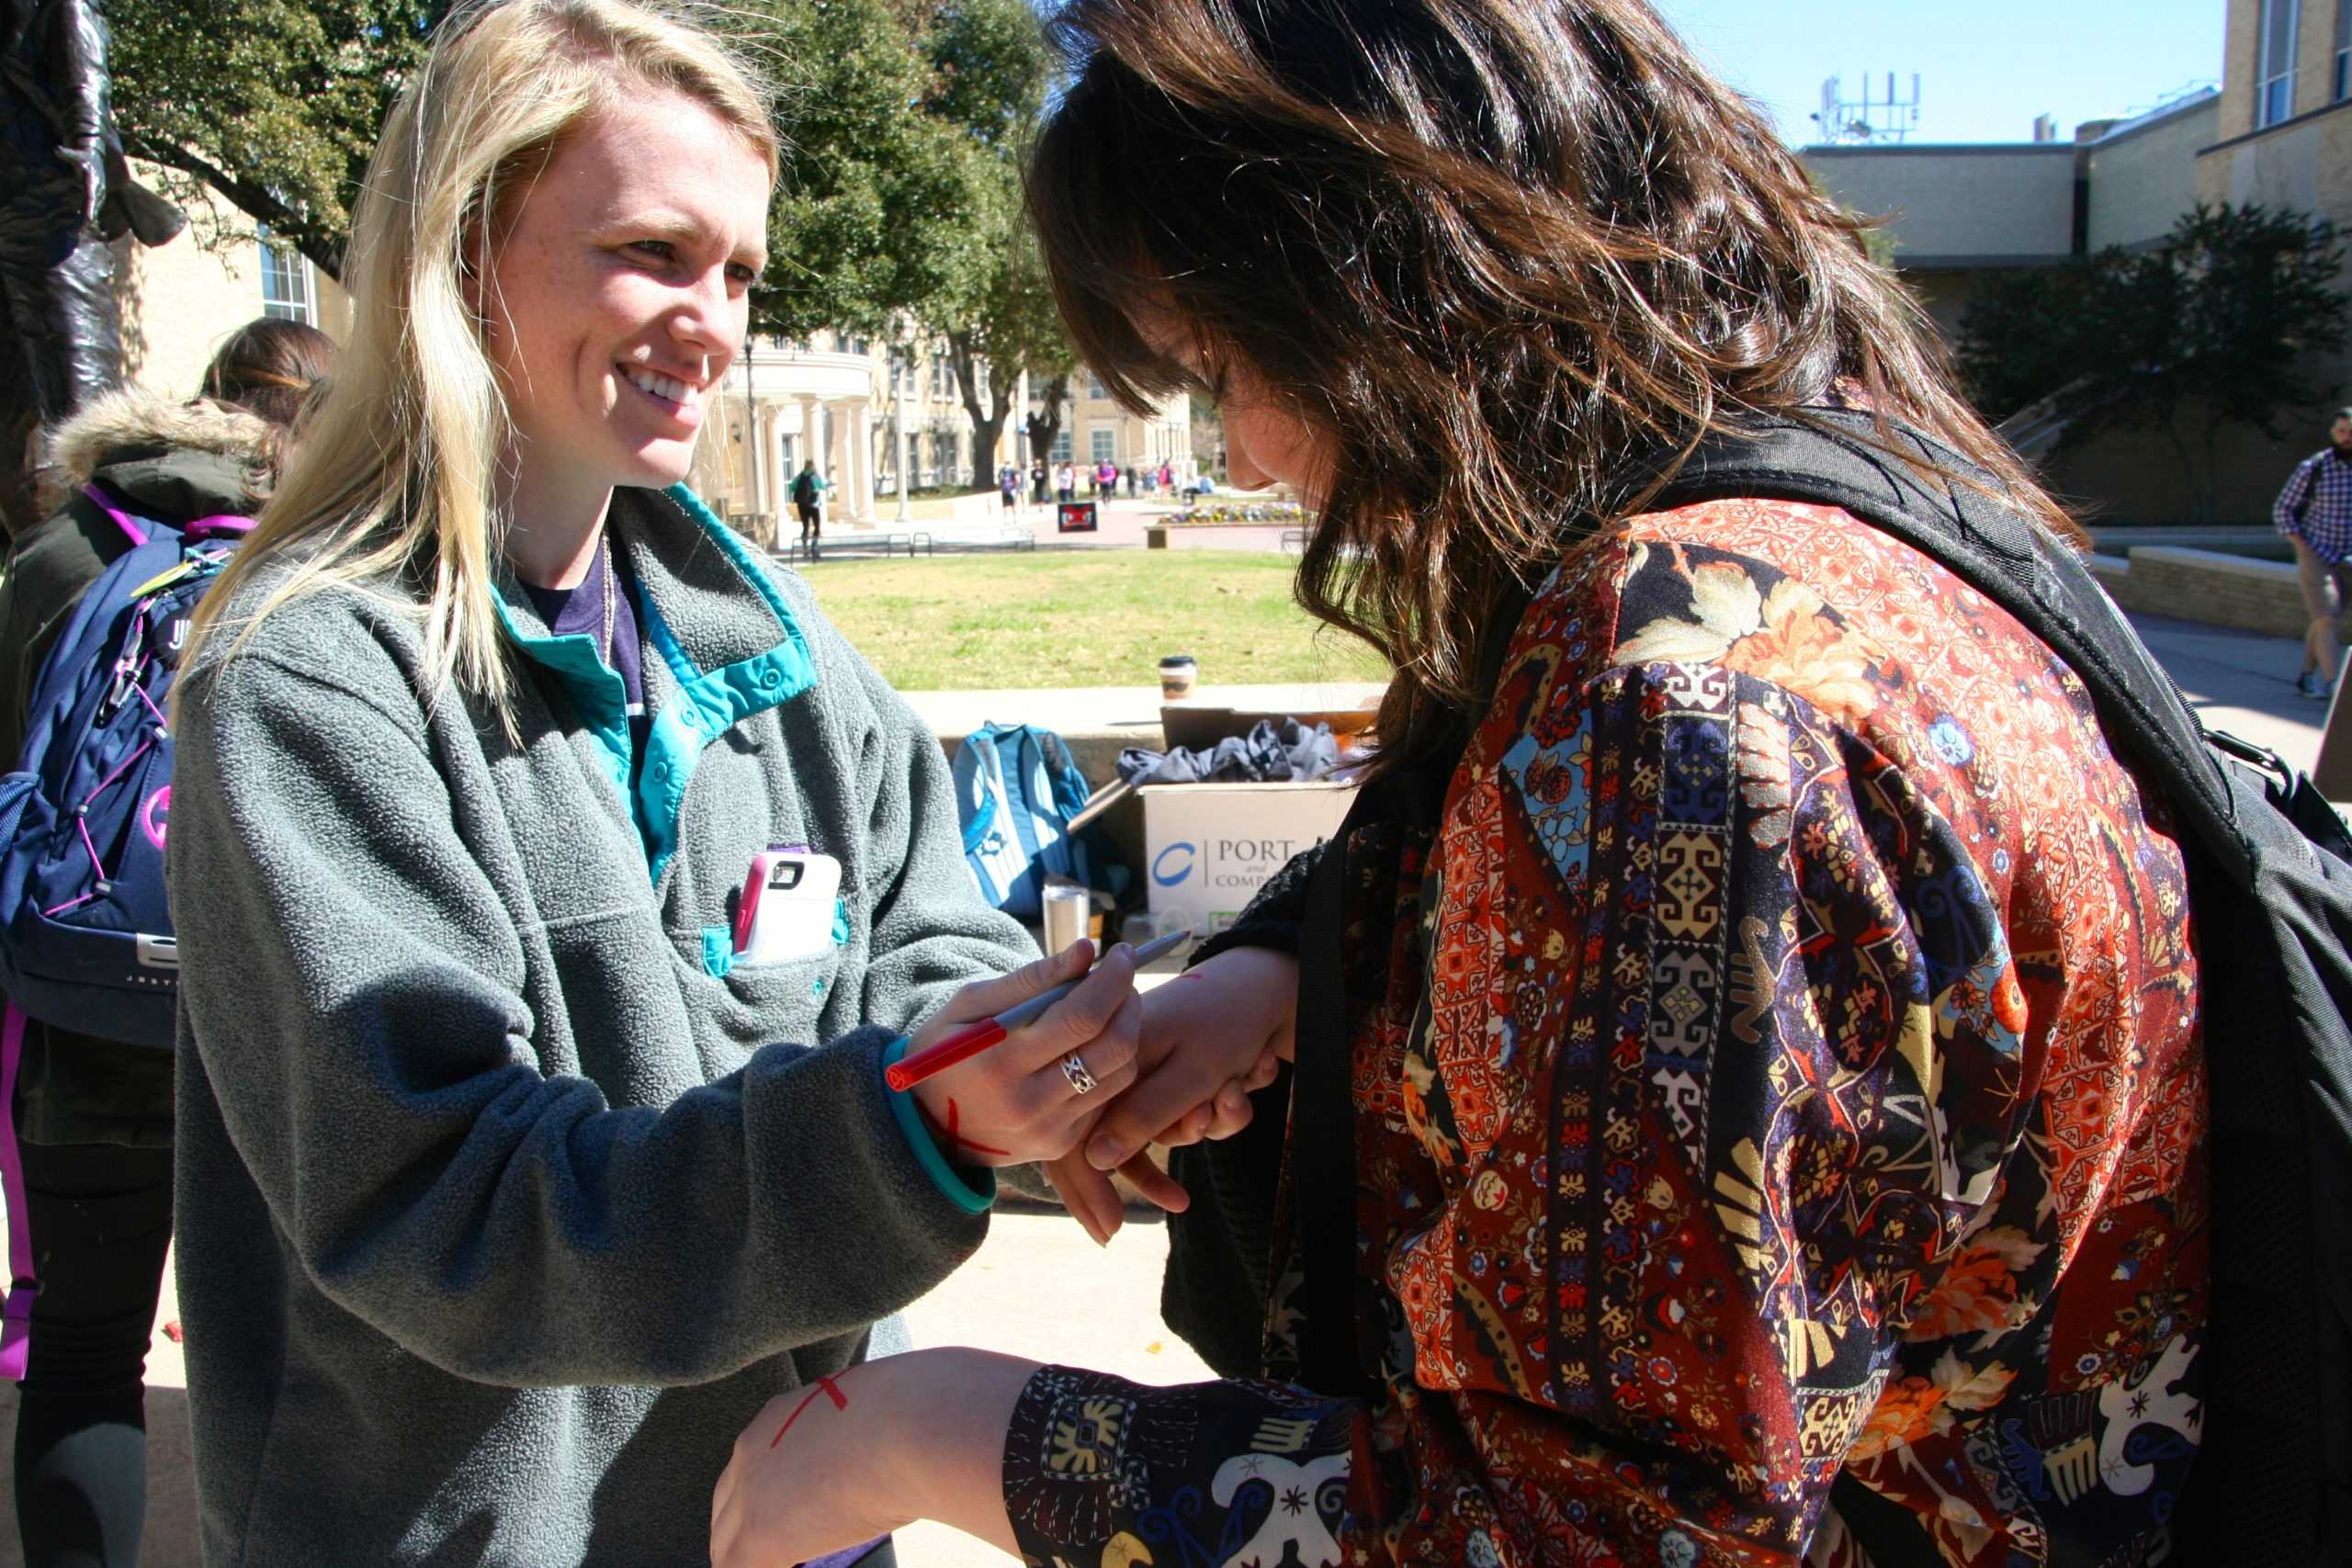 International+Justice+Mission+at+TCU+put+human+trafficking+in+its+place+last+week+with+the+%23EndItMovement.+